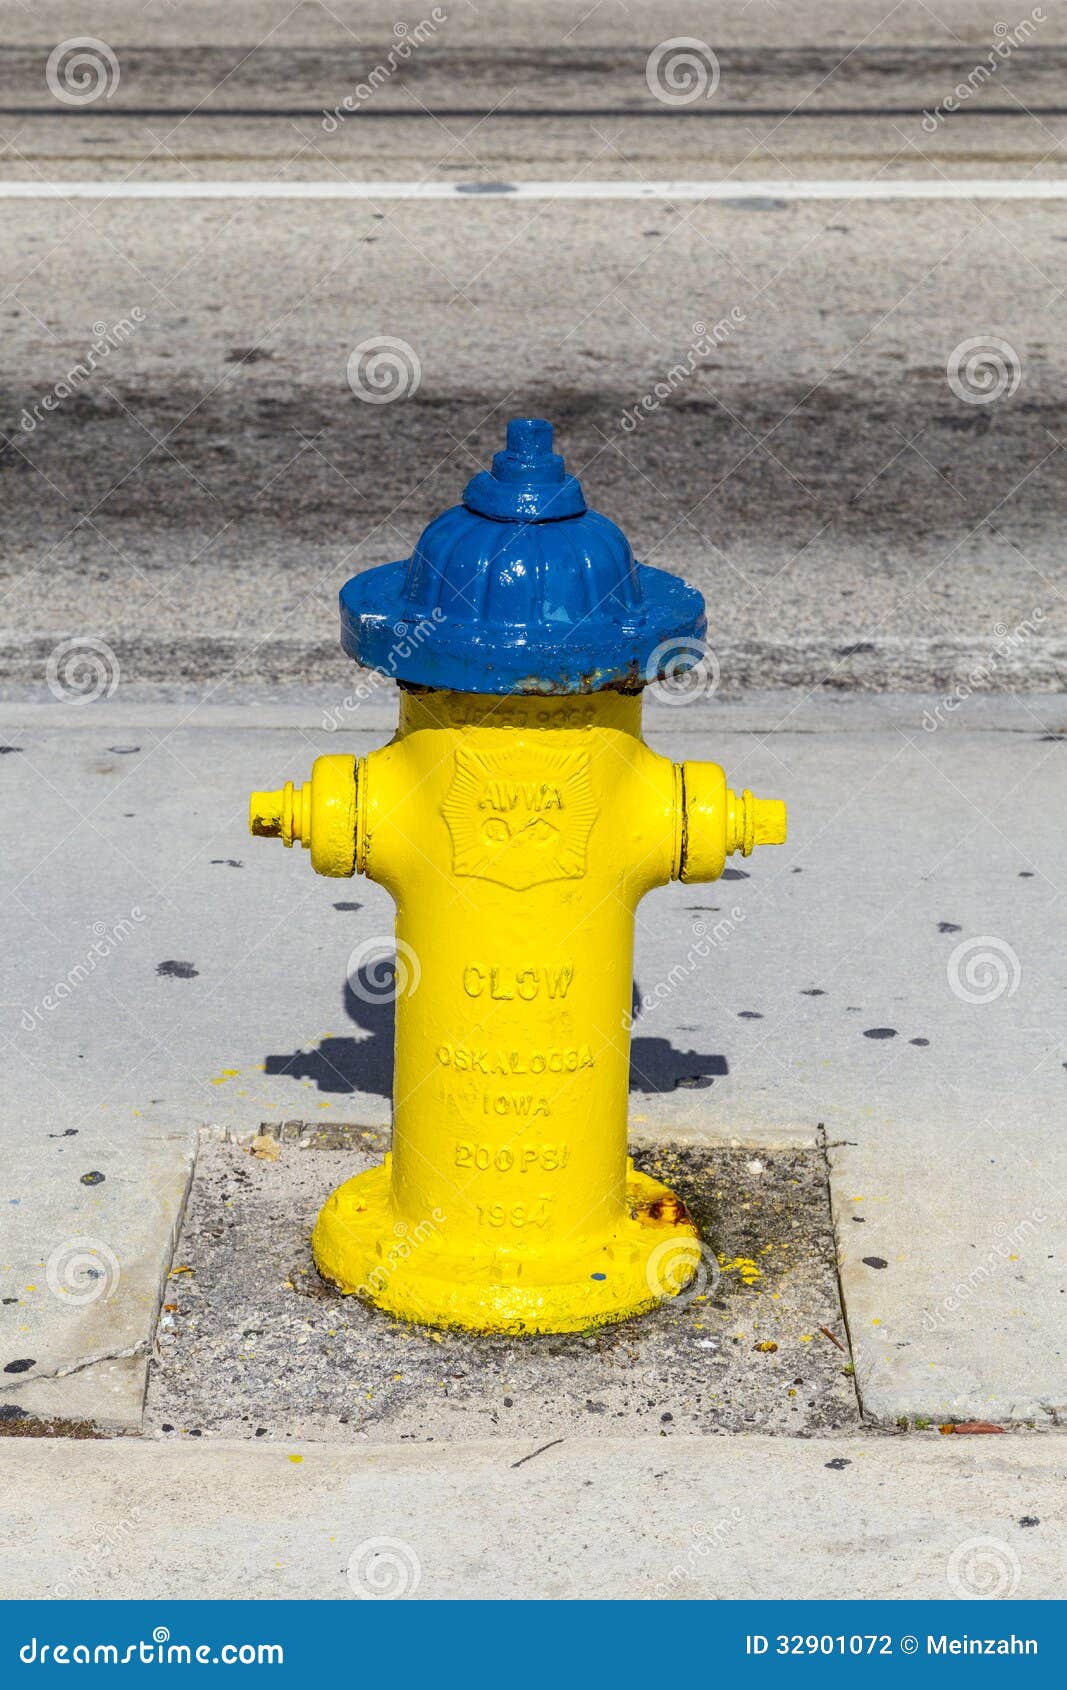 Yellow Fire Hydrant stock photo. Image of america, rescuer ...
